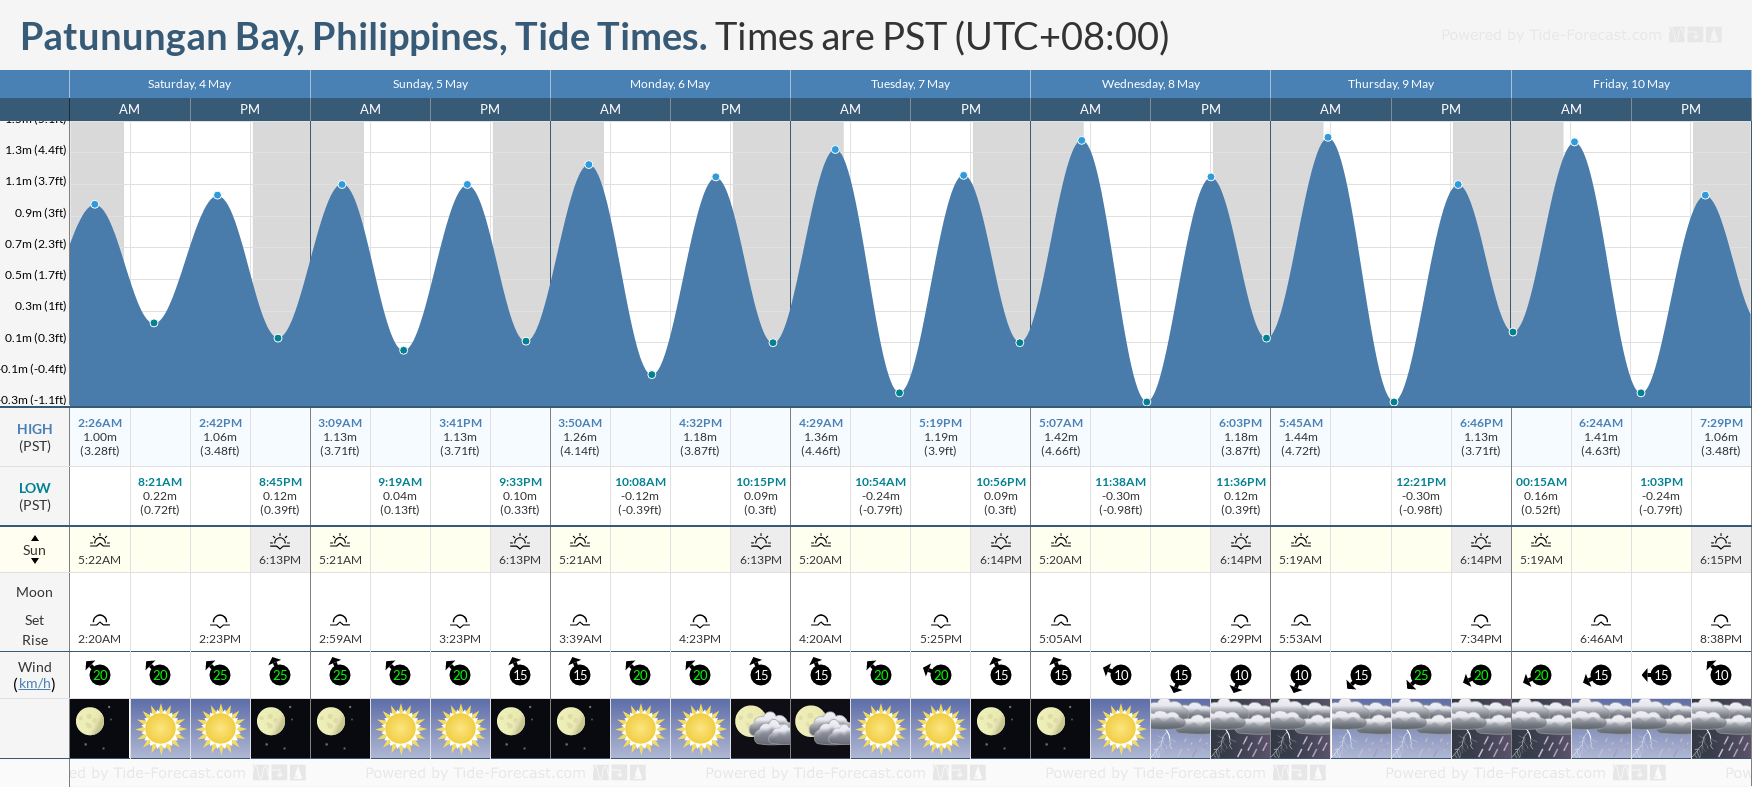 Patunungan Bay, Philippines Tide Chart including high and low tide tide times for the next 7 days